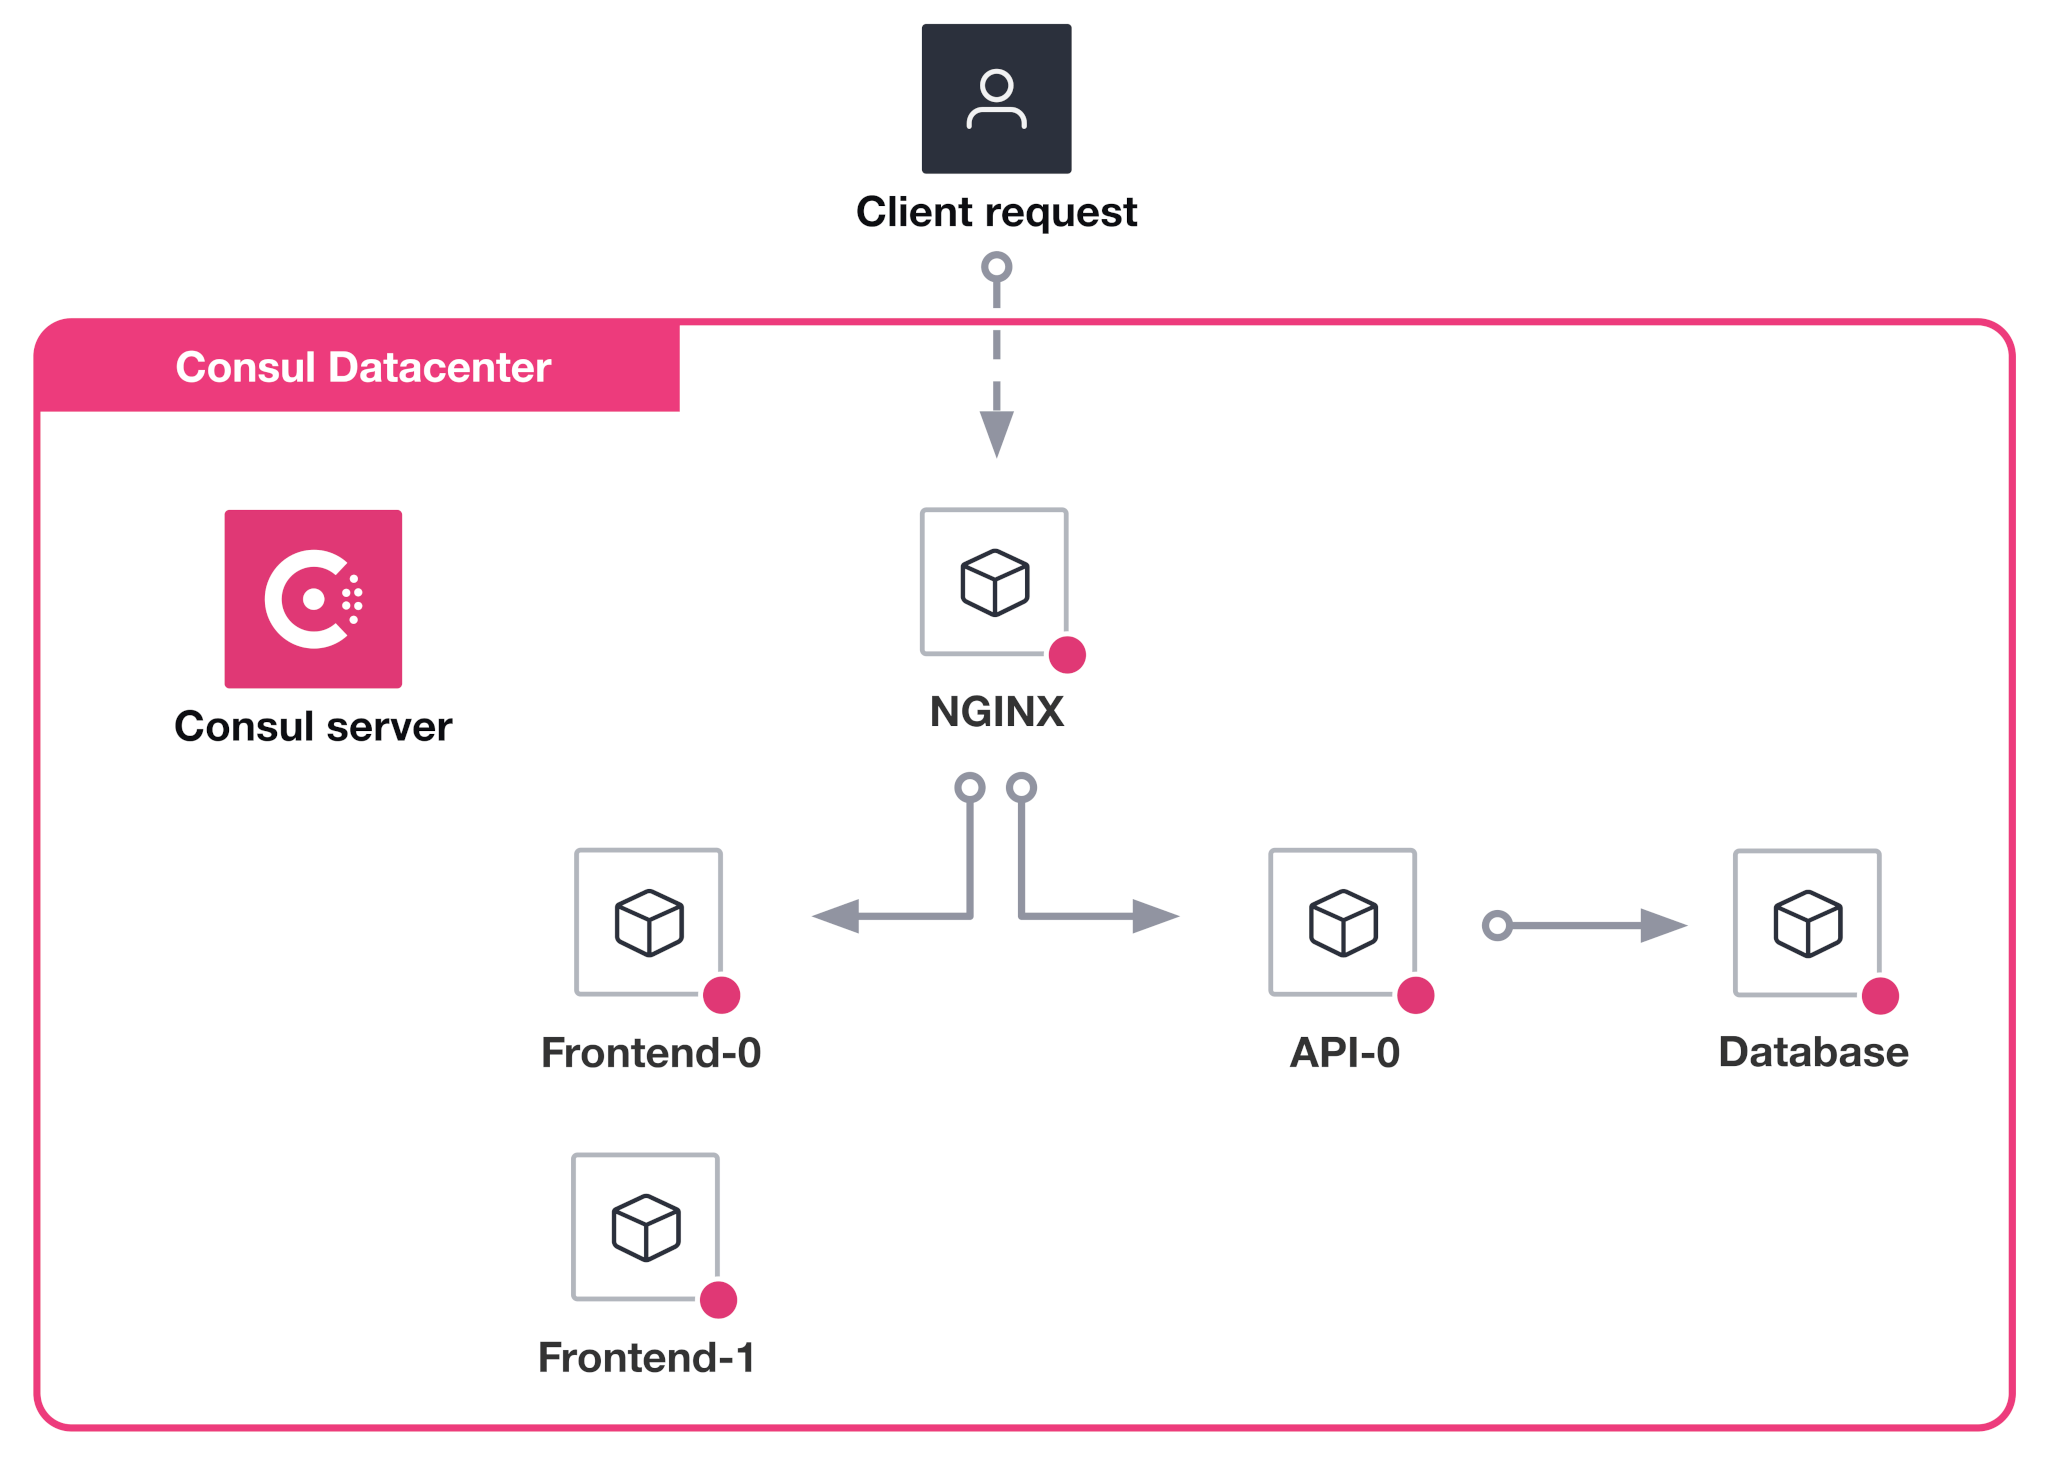 Architecture - Initial architecture, service discovery with two Frontend instances